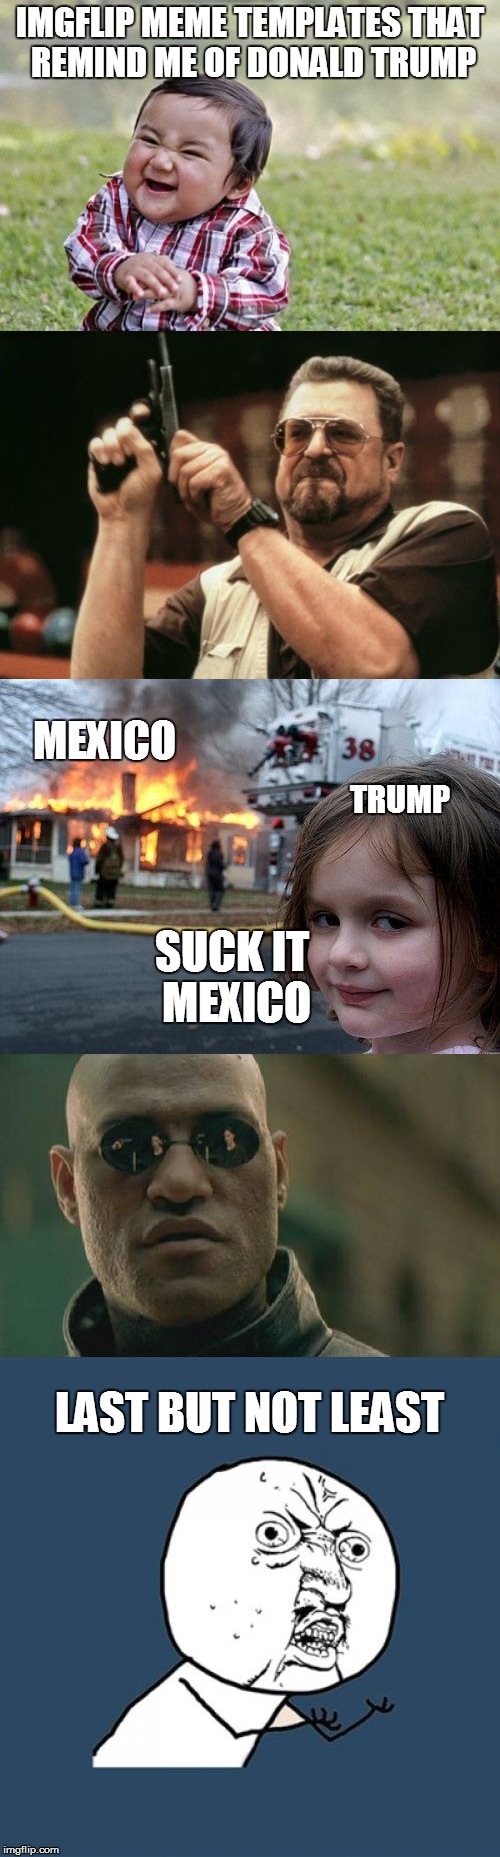 Donald Trump On Imgflip Templates | IMGFLIP MEME TEMPLATES THAT REMIND ME OF DONALD TRUMP; MEXICO; TRUMP; SUCK IT MEXICO; LAST BUT NOT LEAST | image tagged in donald trump | made w/ Imgflip meme maker